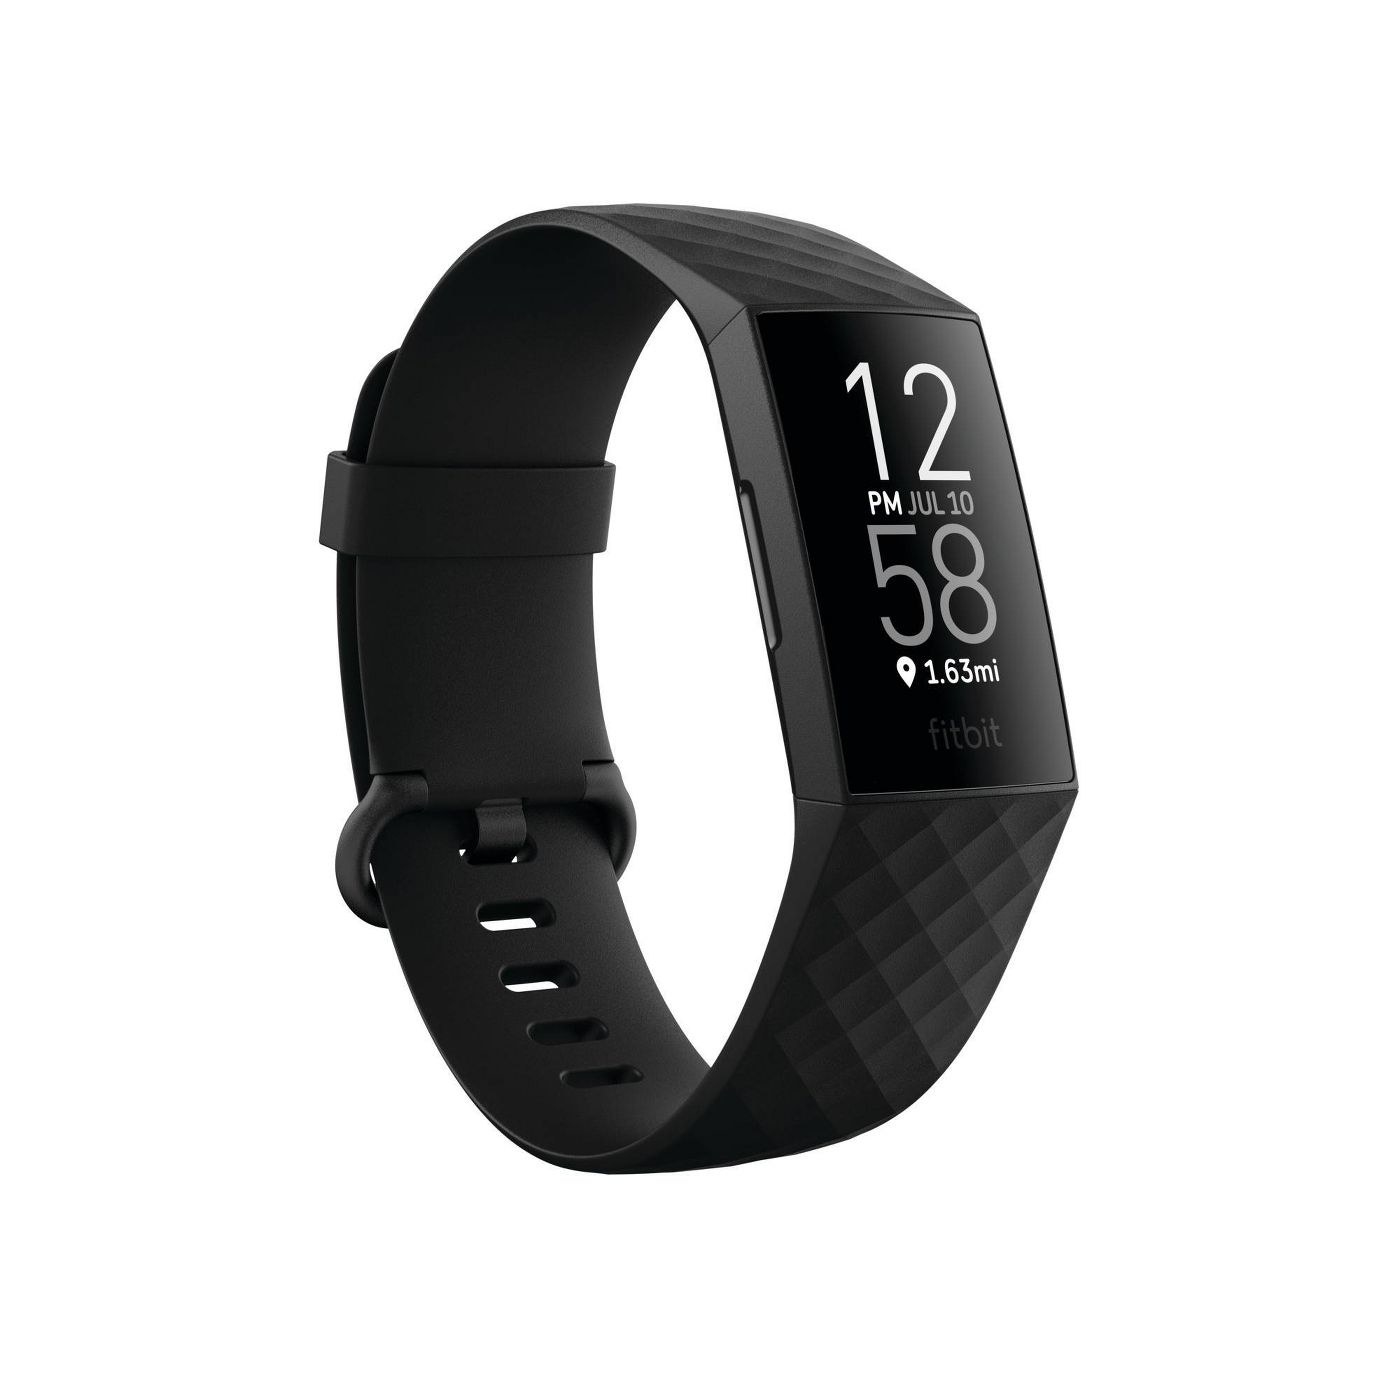 The FitBit